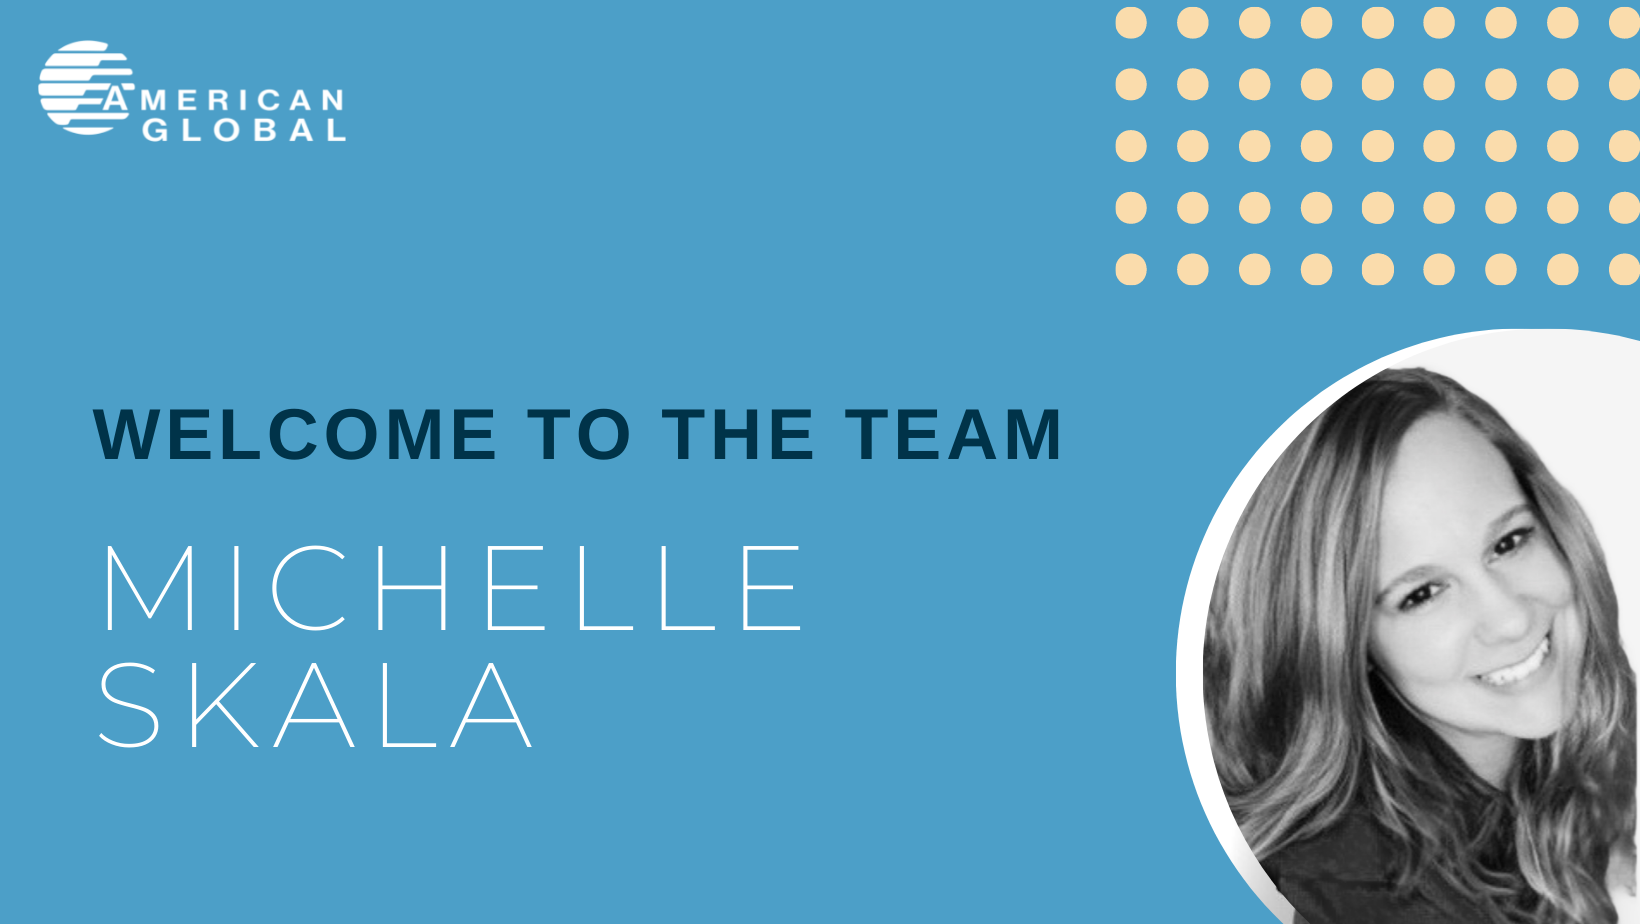 welcome to the team message with Michelle Skala’s image